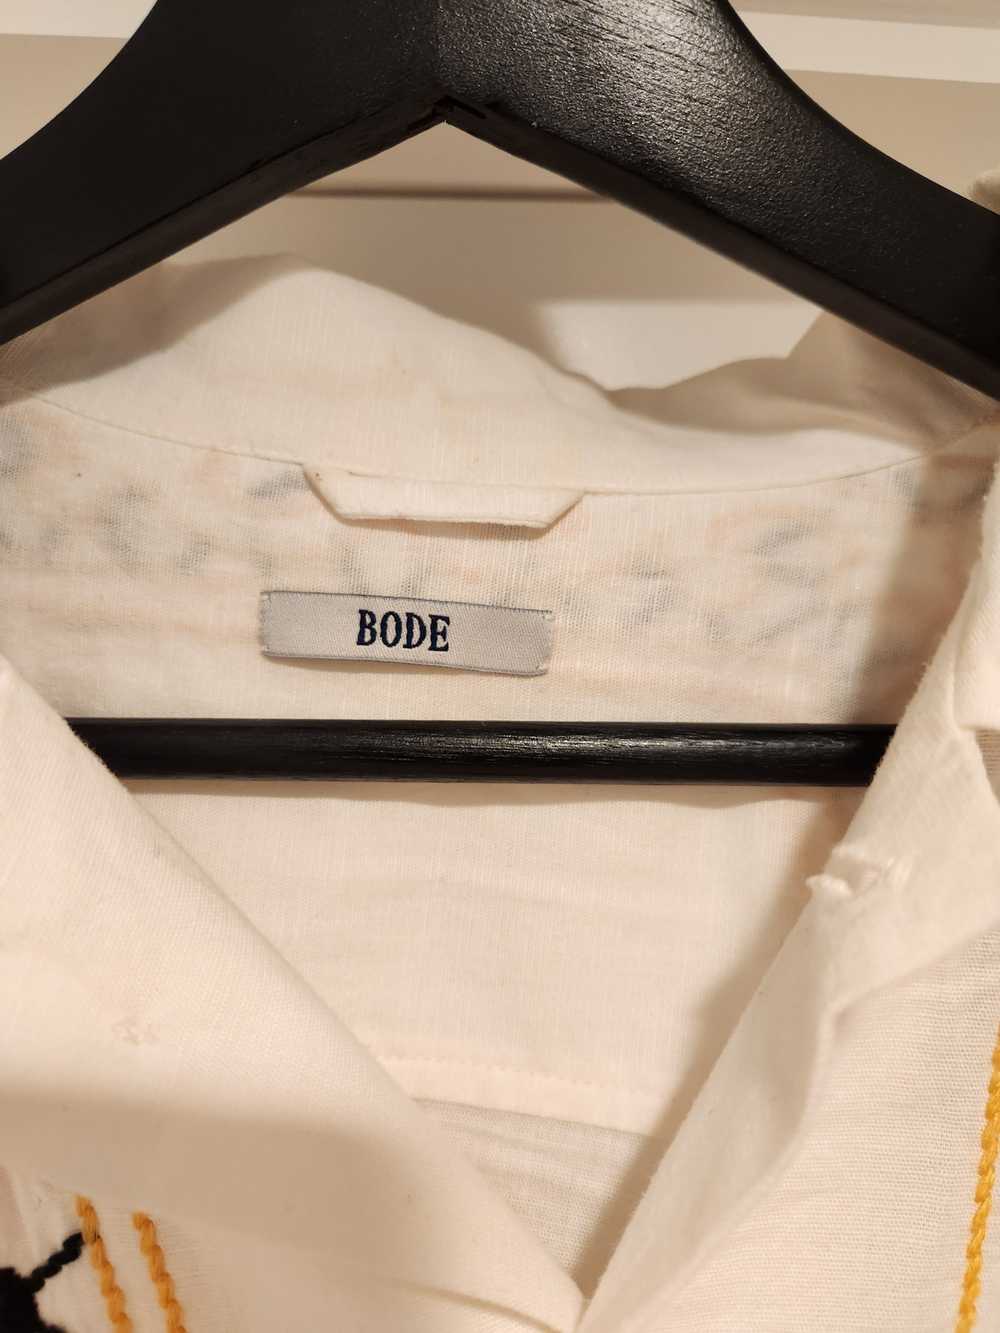 Bode Embroidered long-sleeved shirt - image 3